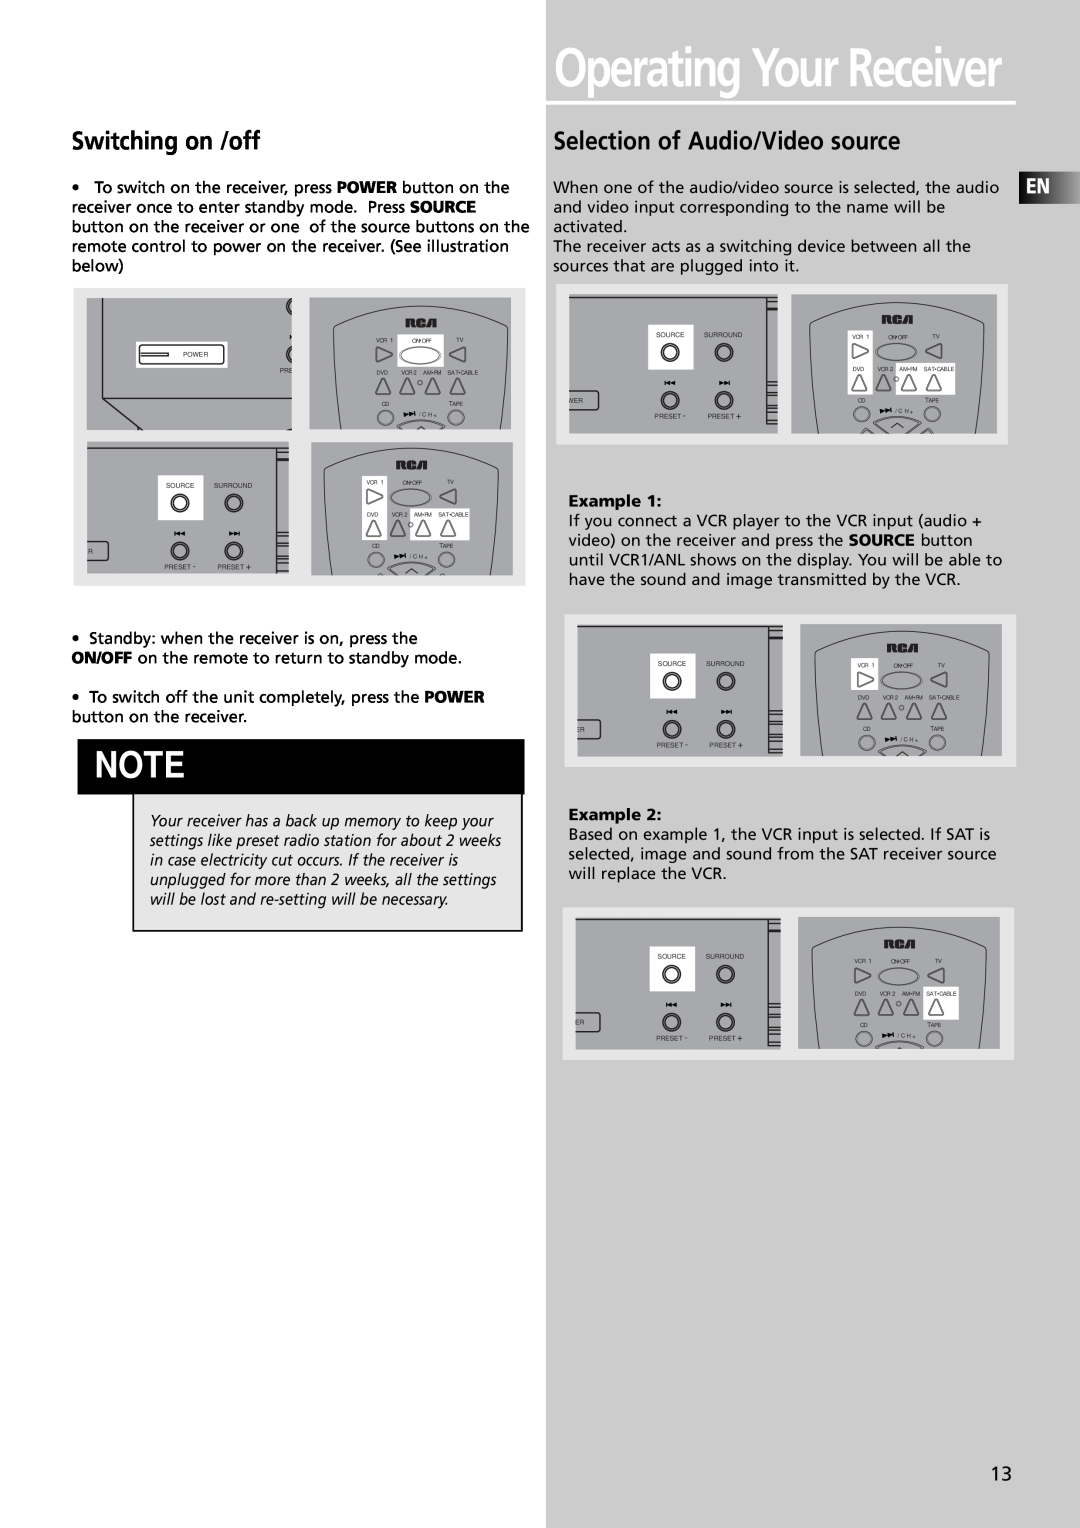 RCA RTDVD1 user manual Switching on /off, Selection of Audio/Video source, Operating Your Receiver 